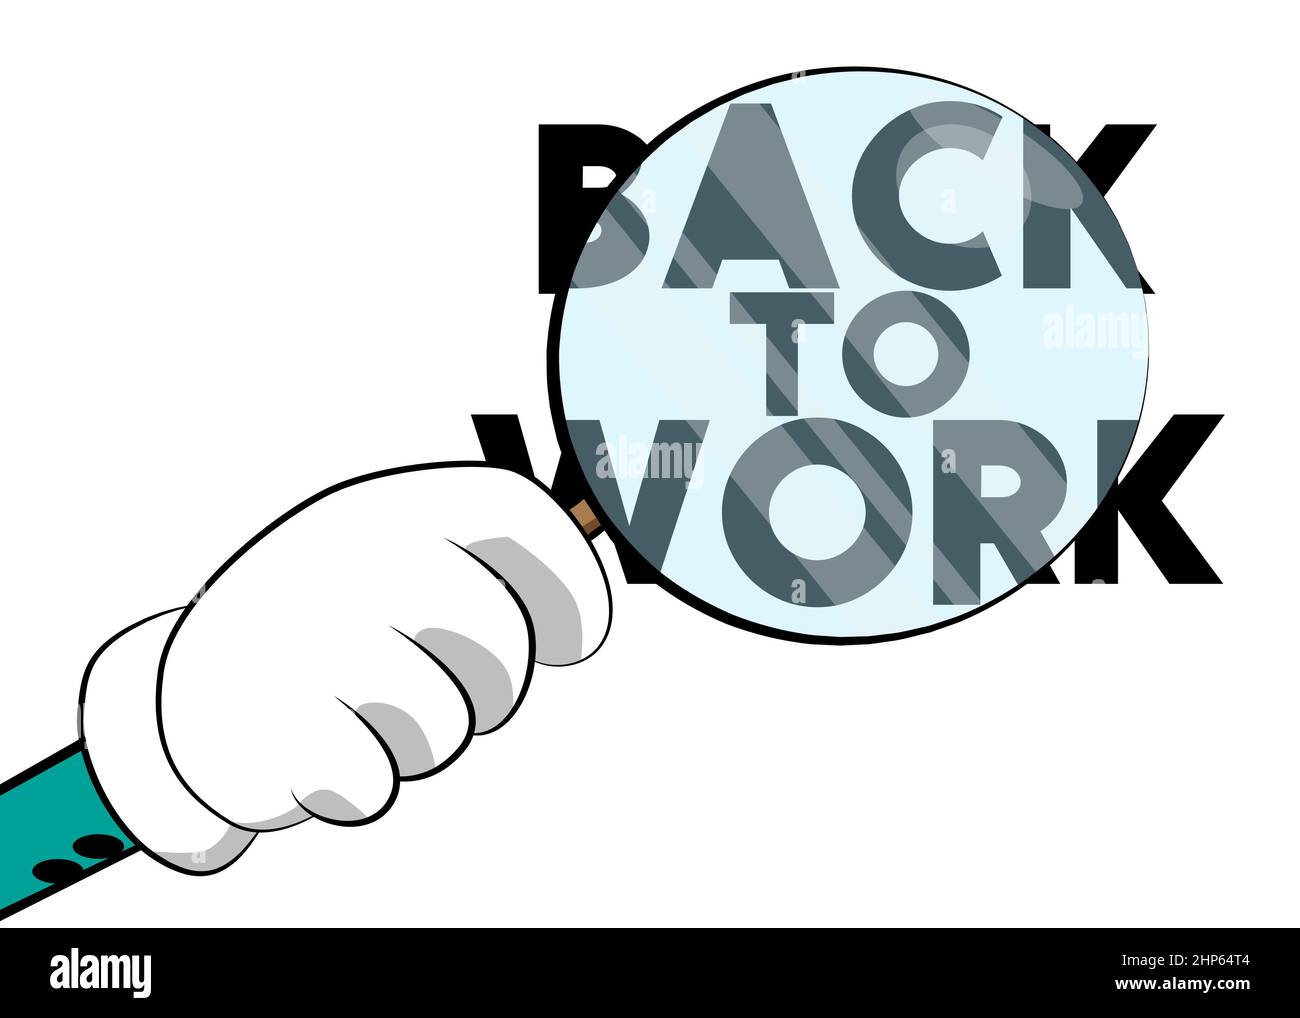 Back to work text, working vacation, holiday break or unemployed business concept. Stock Vector